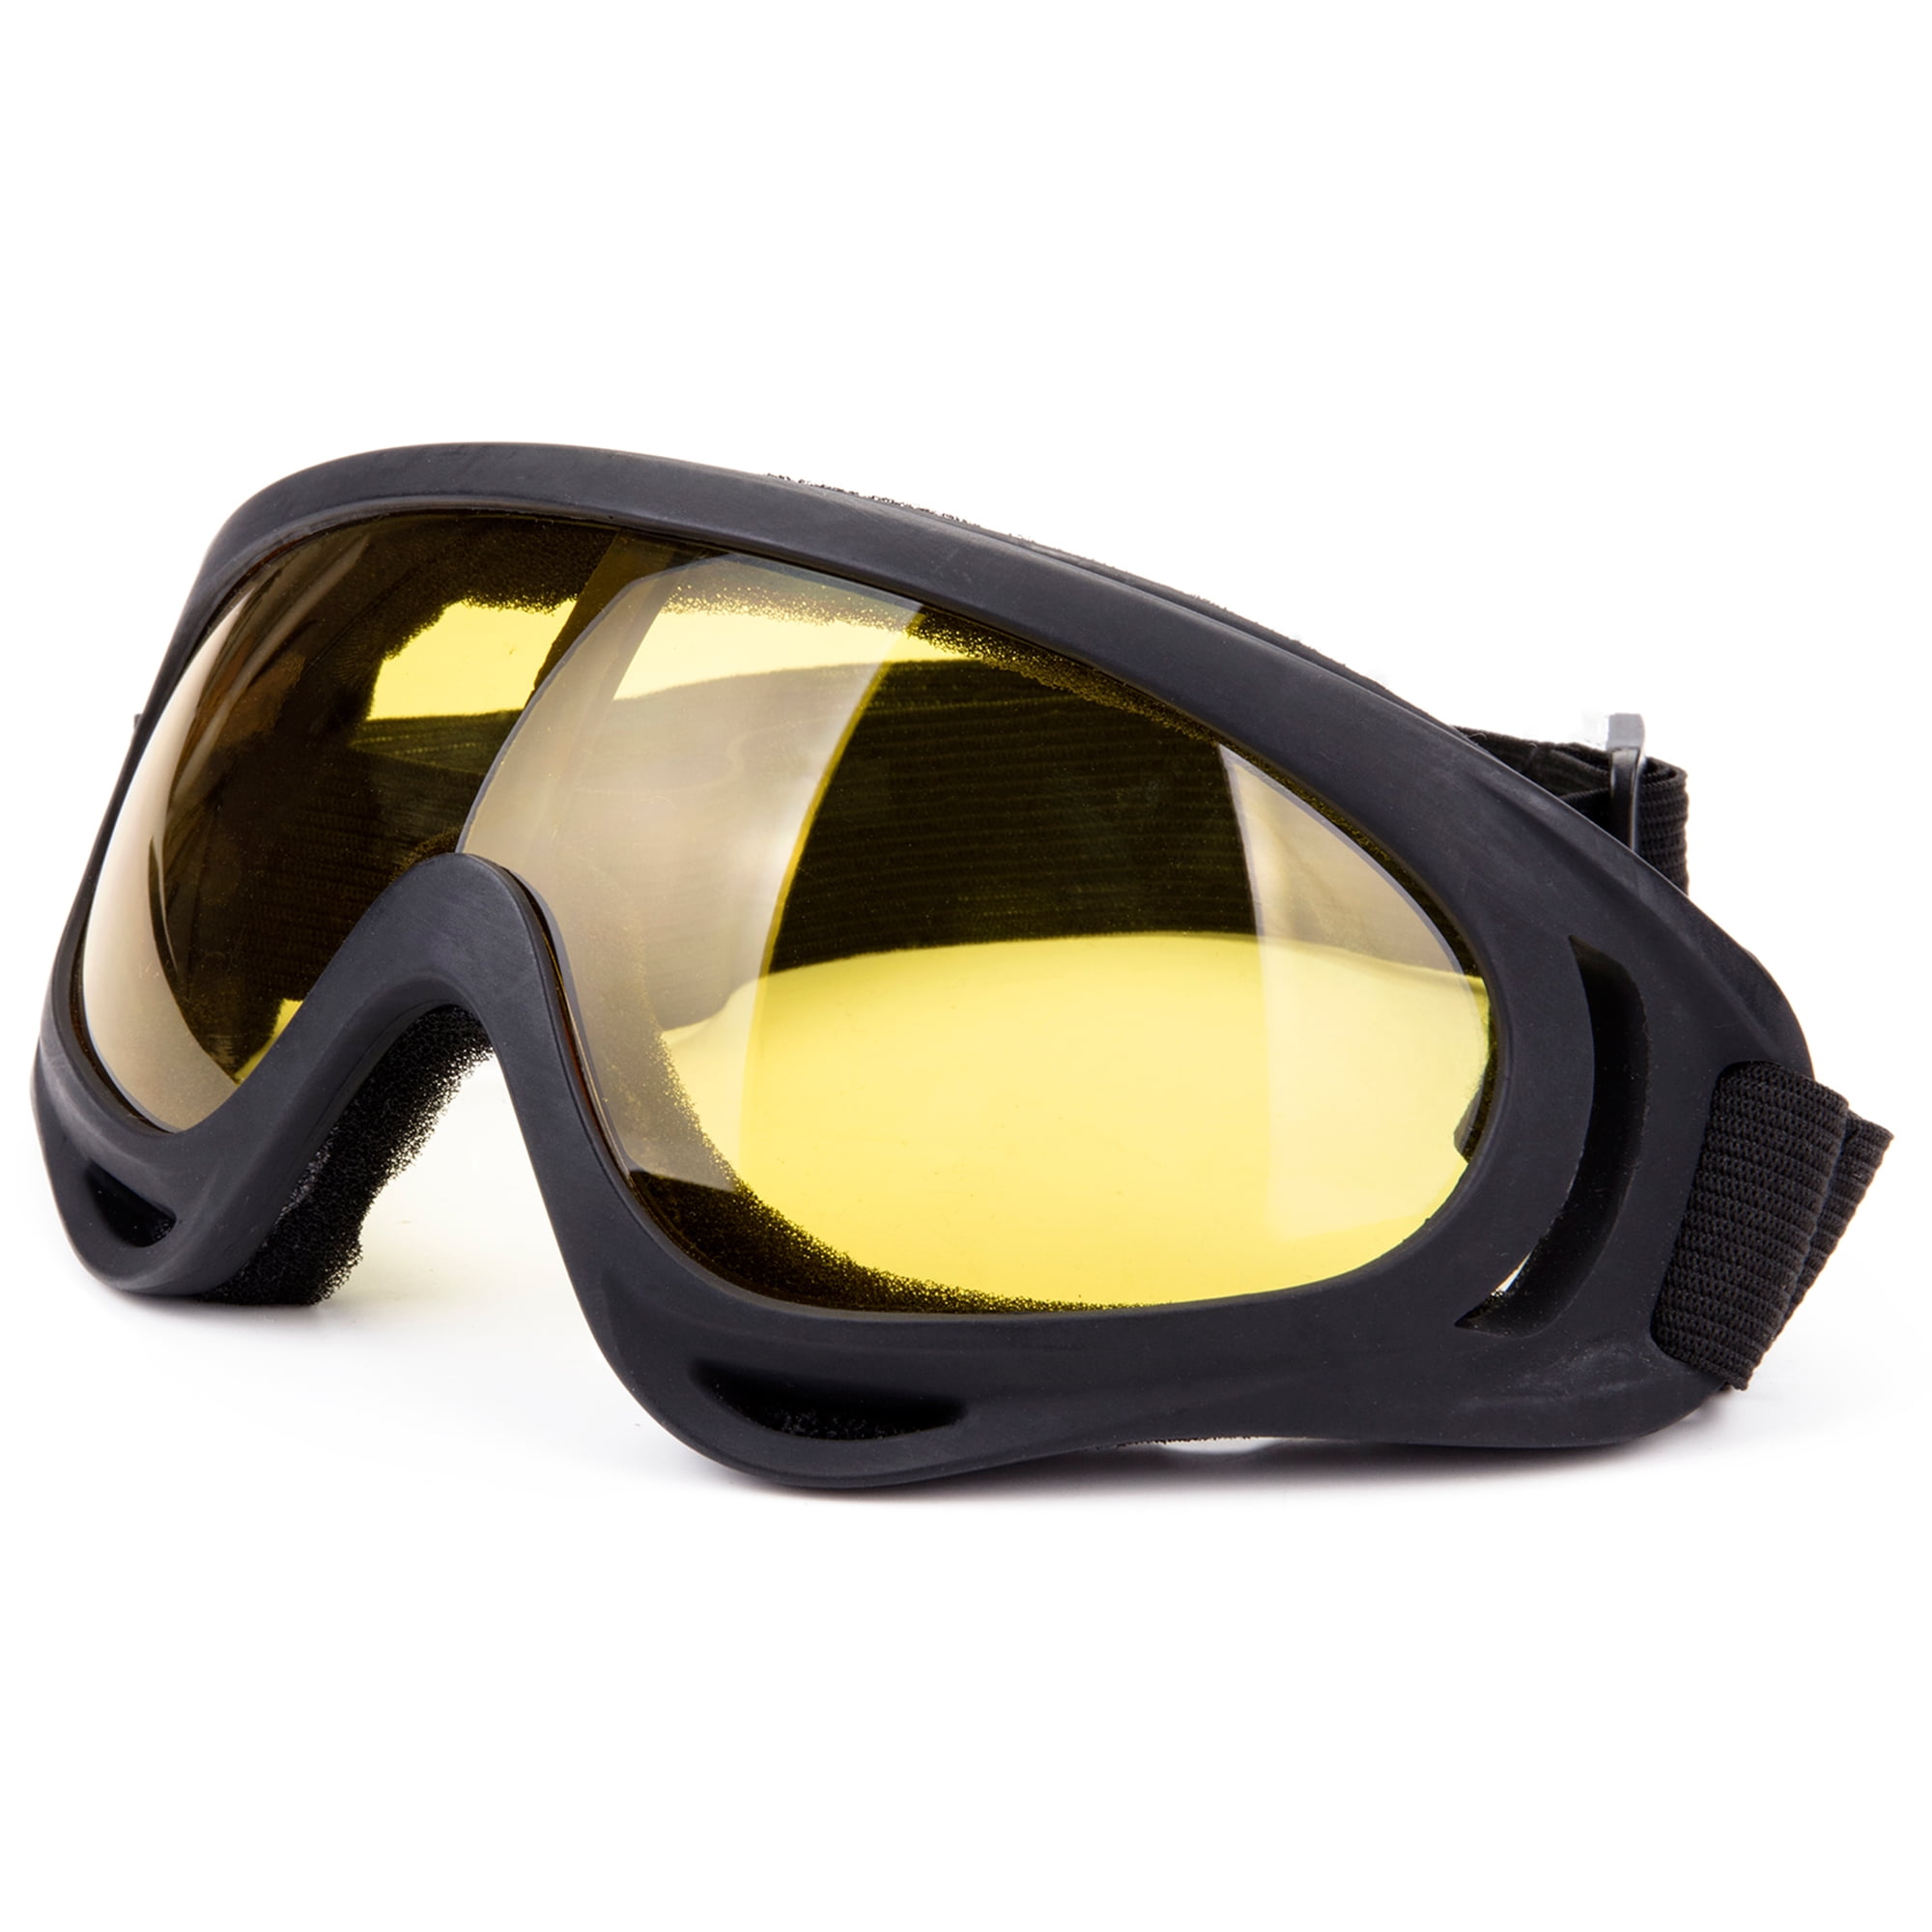 Pro UV Protective Glasses Motorcycle Windproof Goggles Outdoor Tactical Goggles 